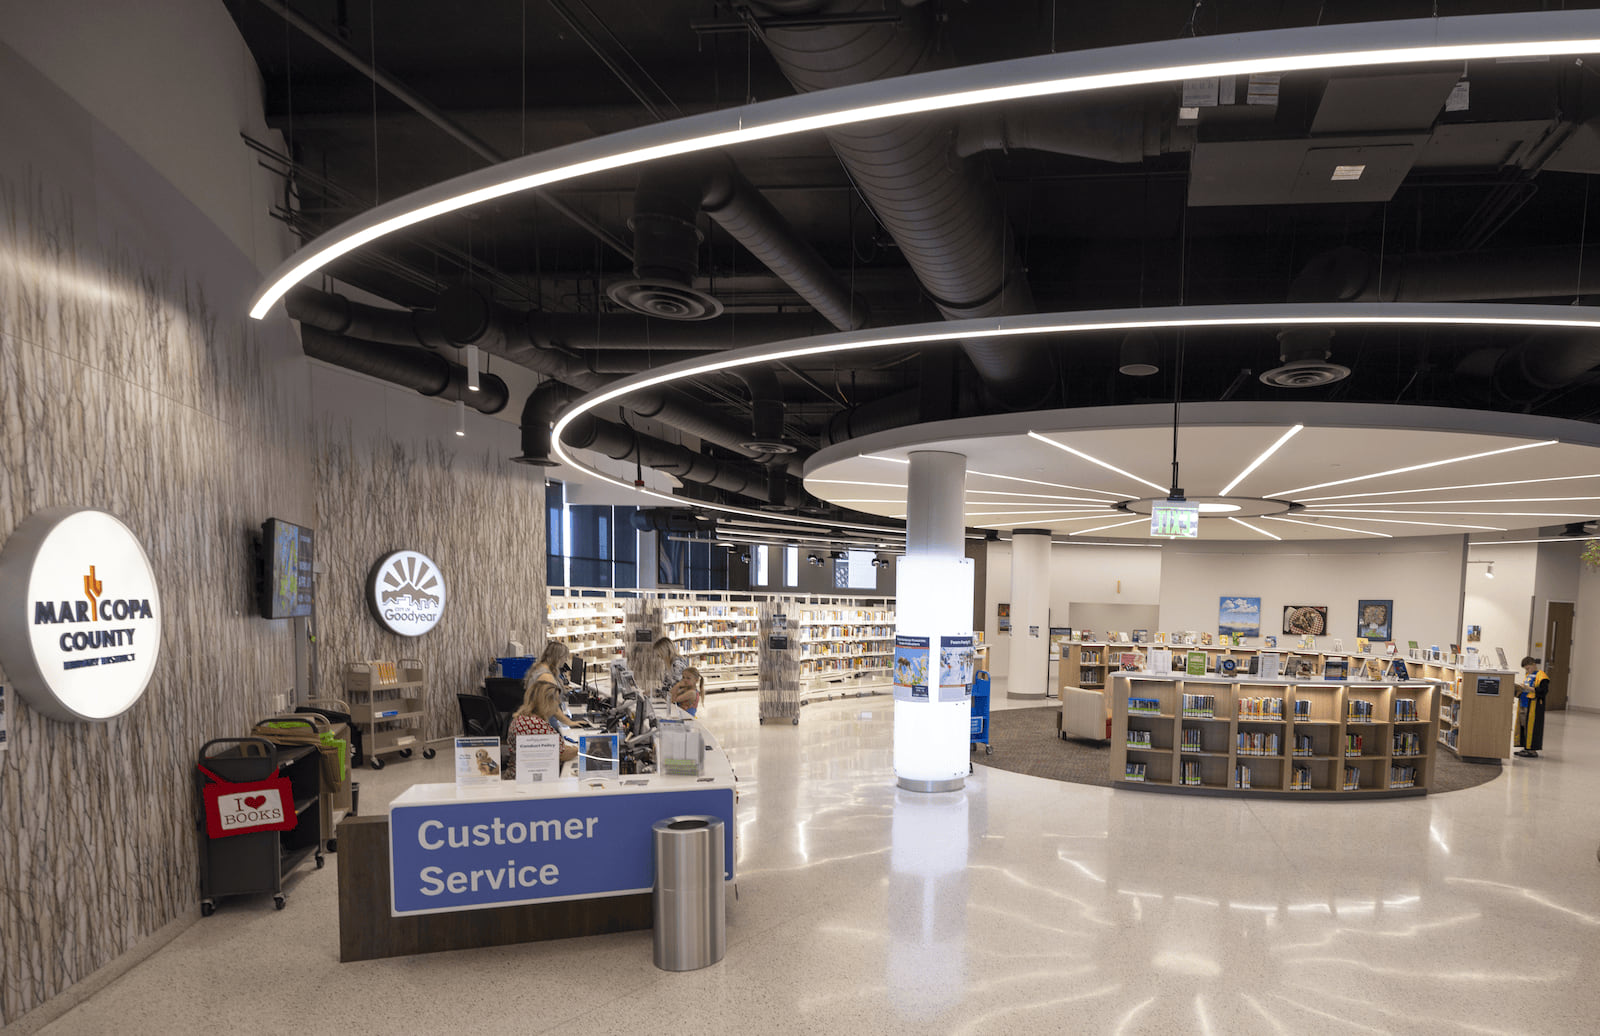 Photo from the north entrance of the library of the Customer Service desk and kids shelves